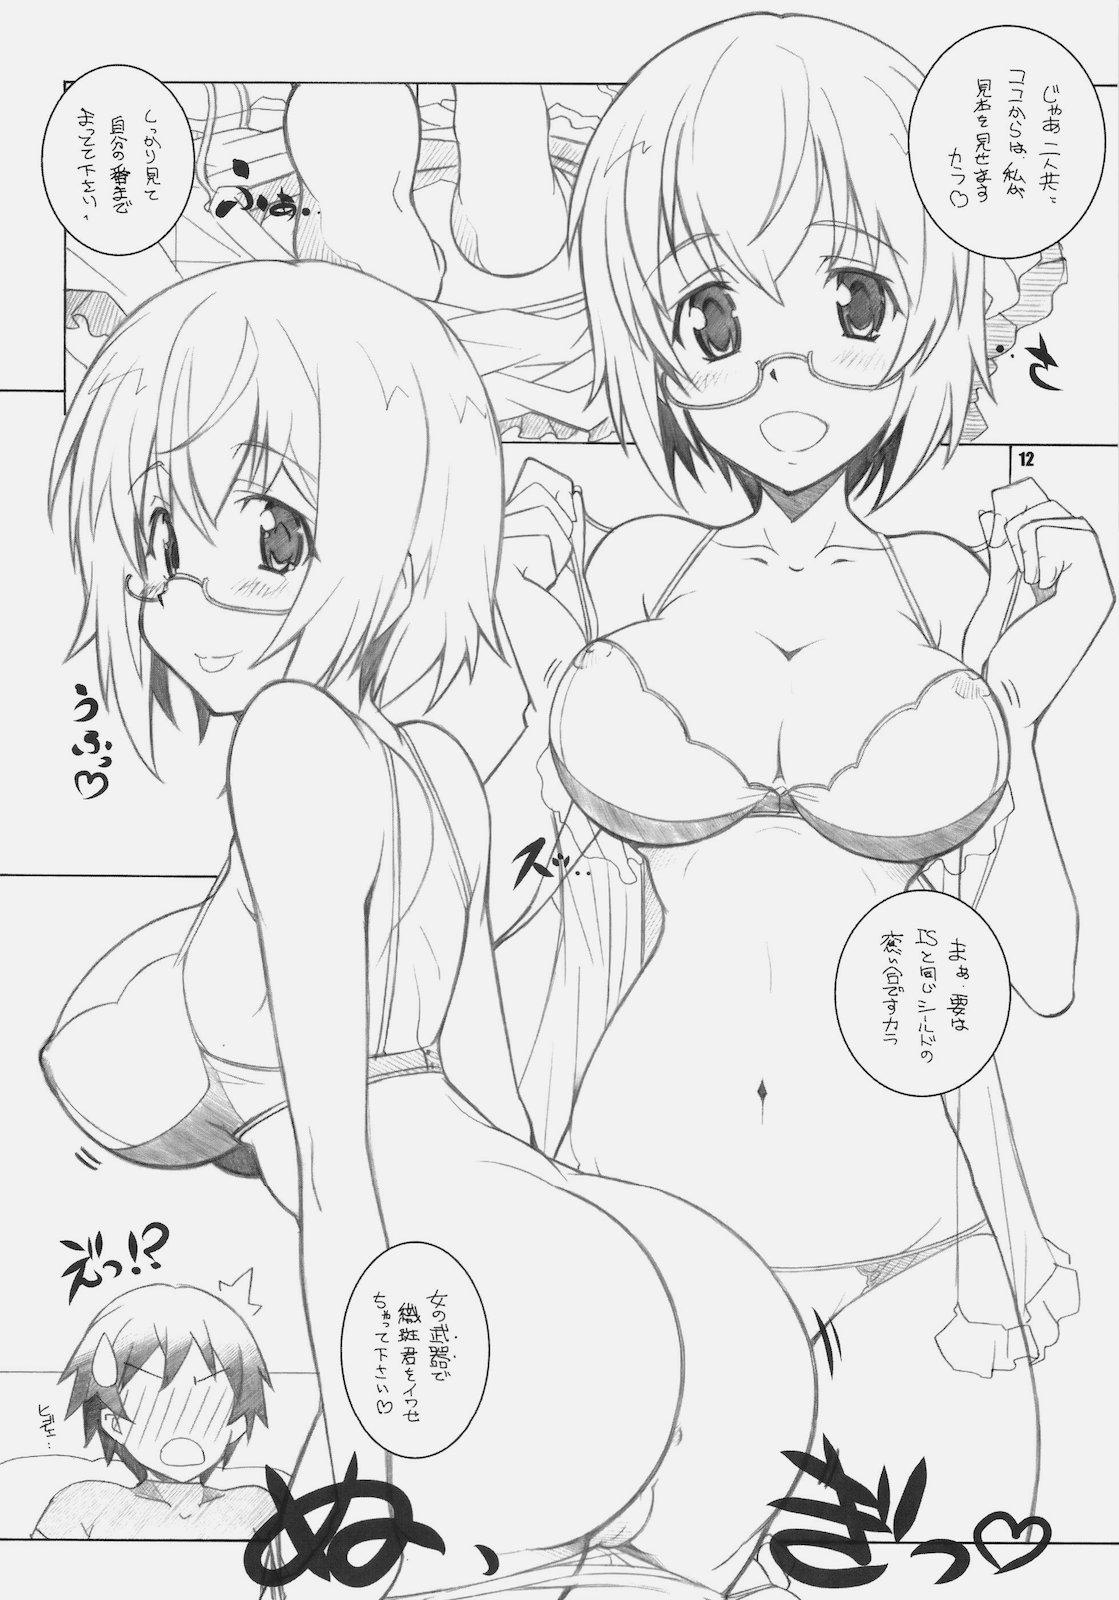 Harcore SEA IS - Infinite stratos Tight Cunt - Page 11